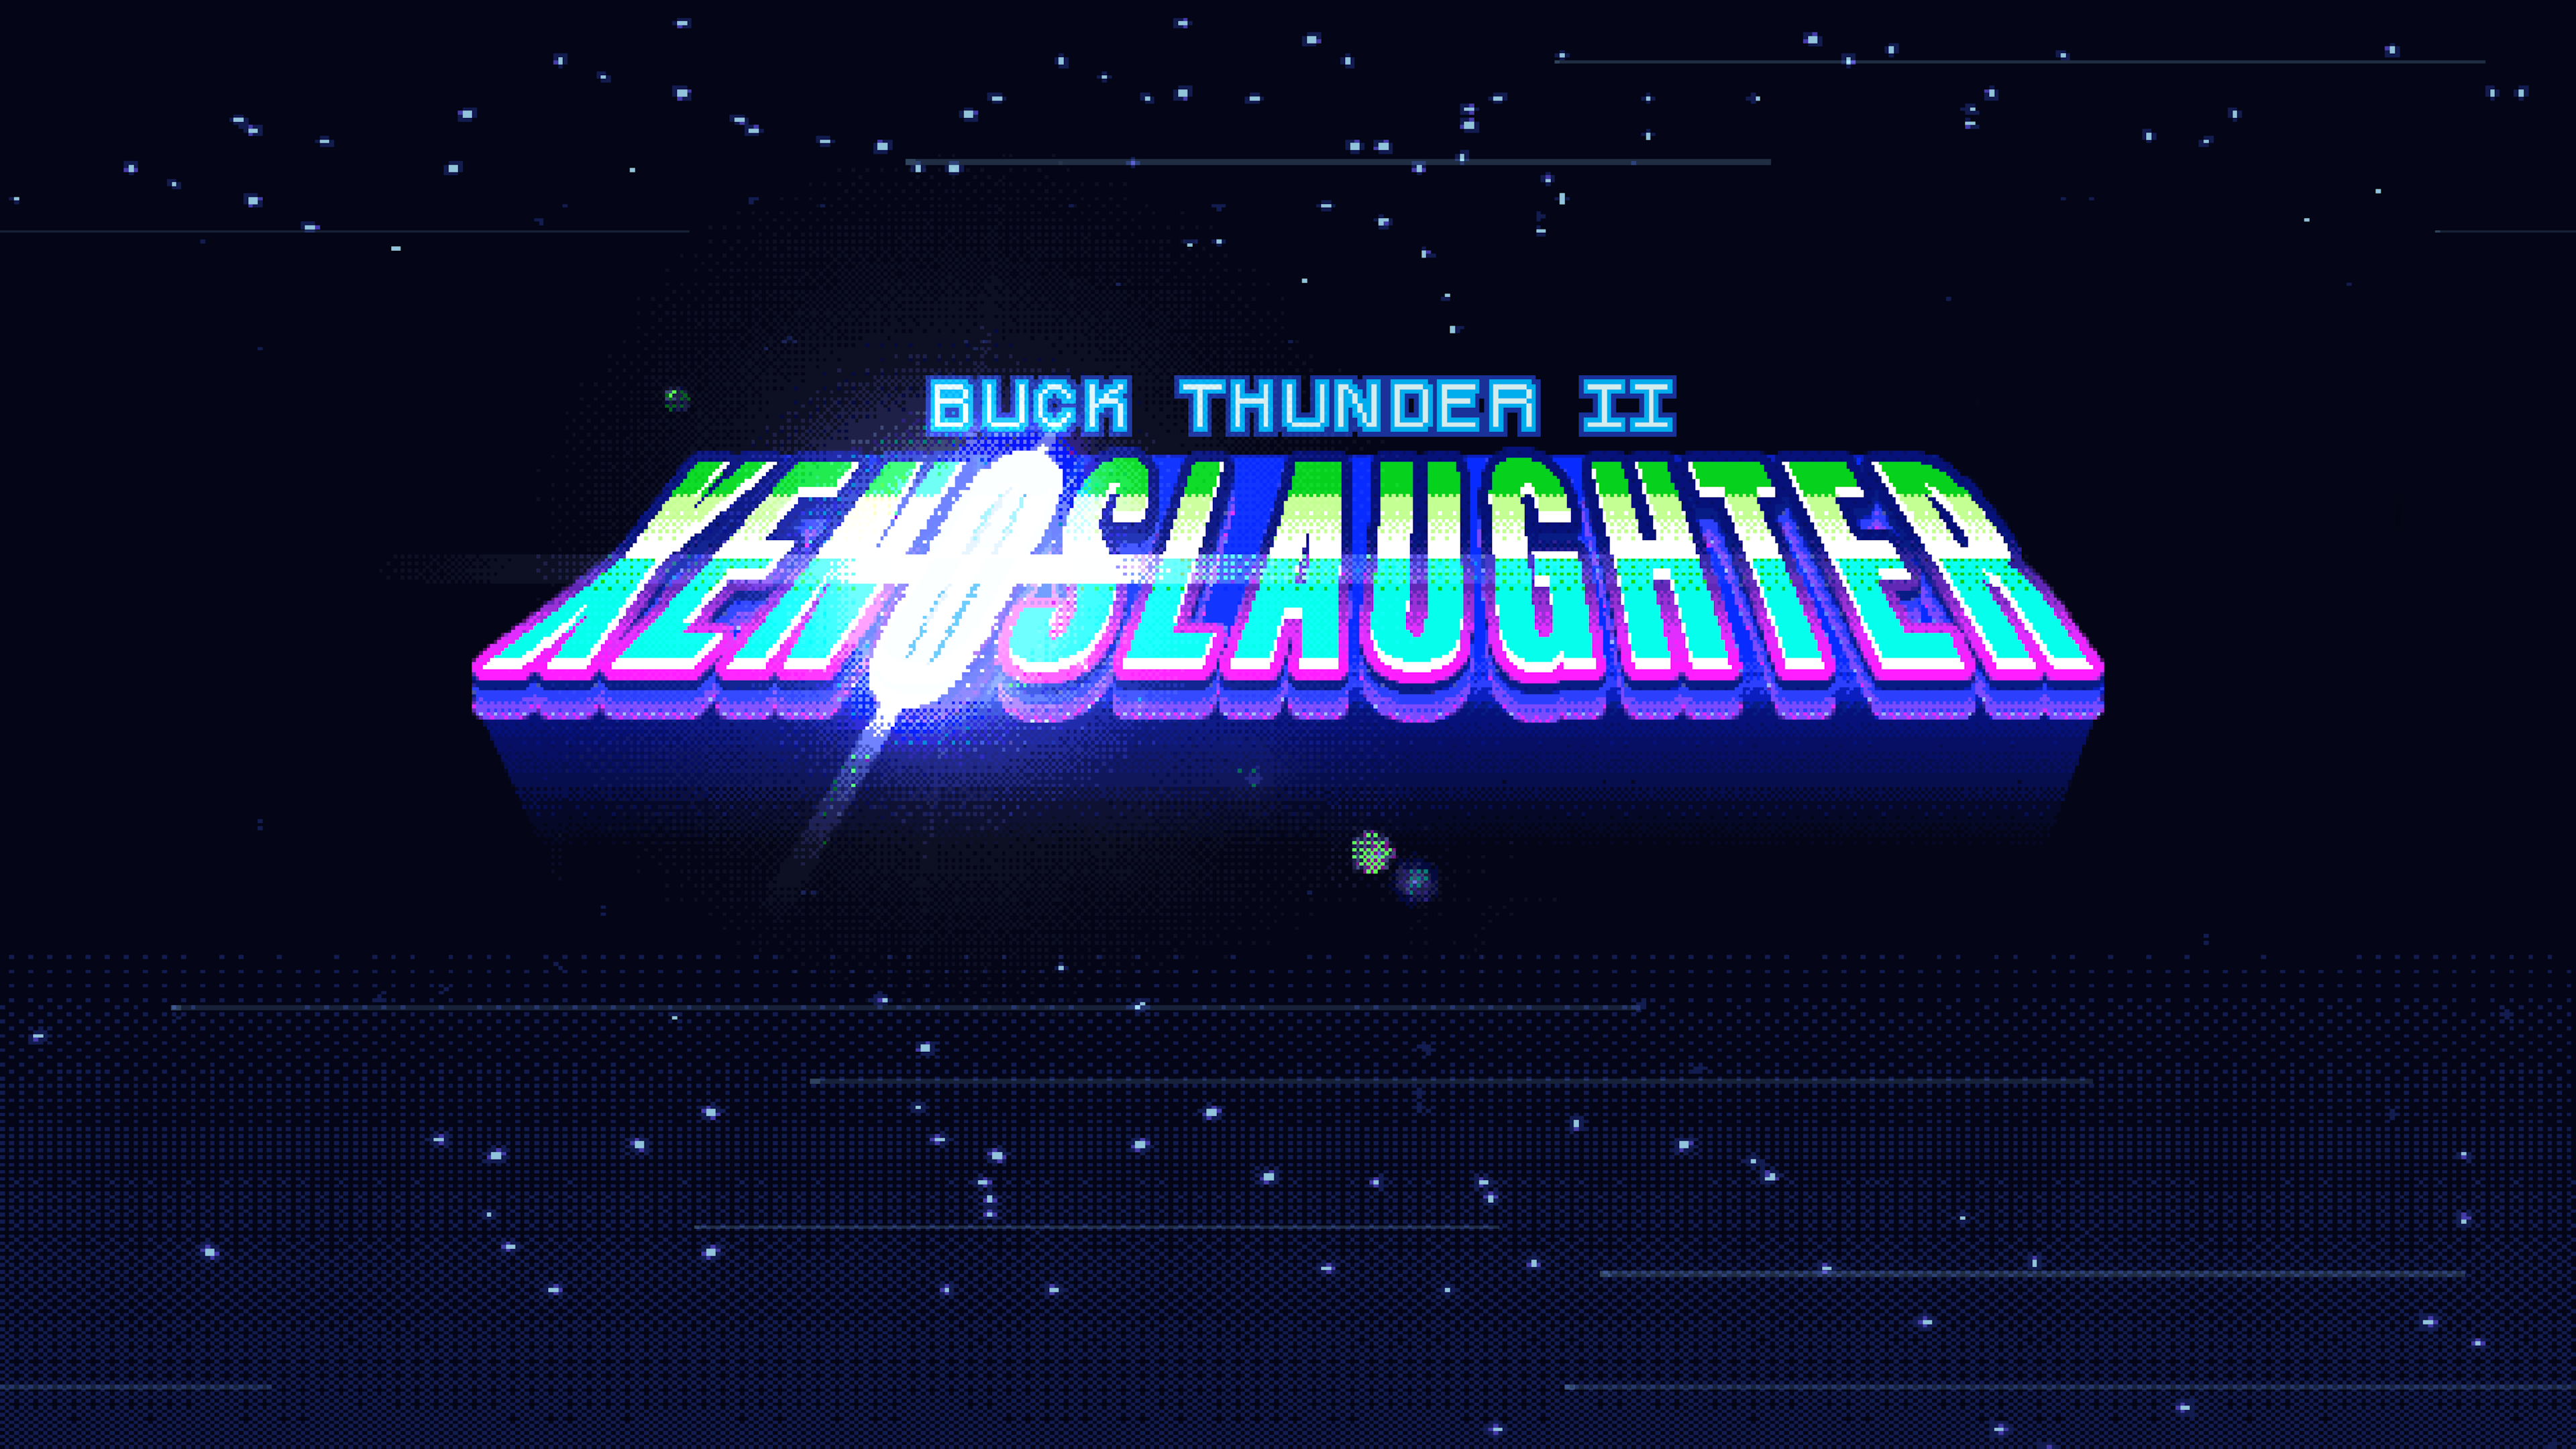 General 3840x2160 video games Buck Thunder arcade  dark background high on life Xenoslaughter pixel art pixelated retro games retro style PlayStation Xbox video game art stars